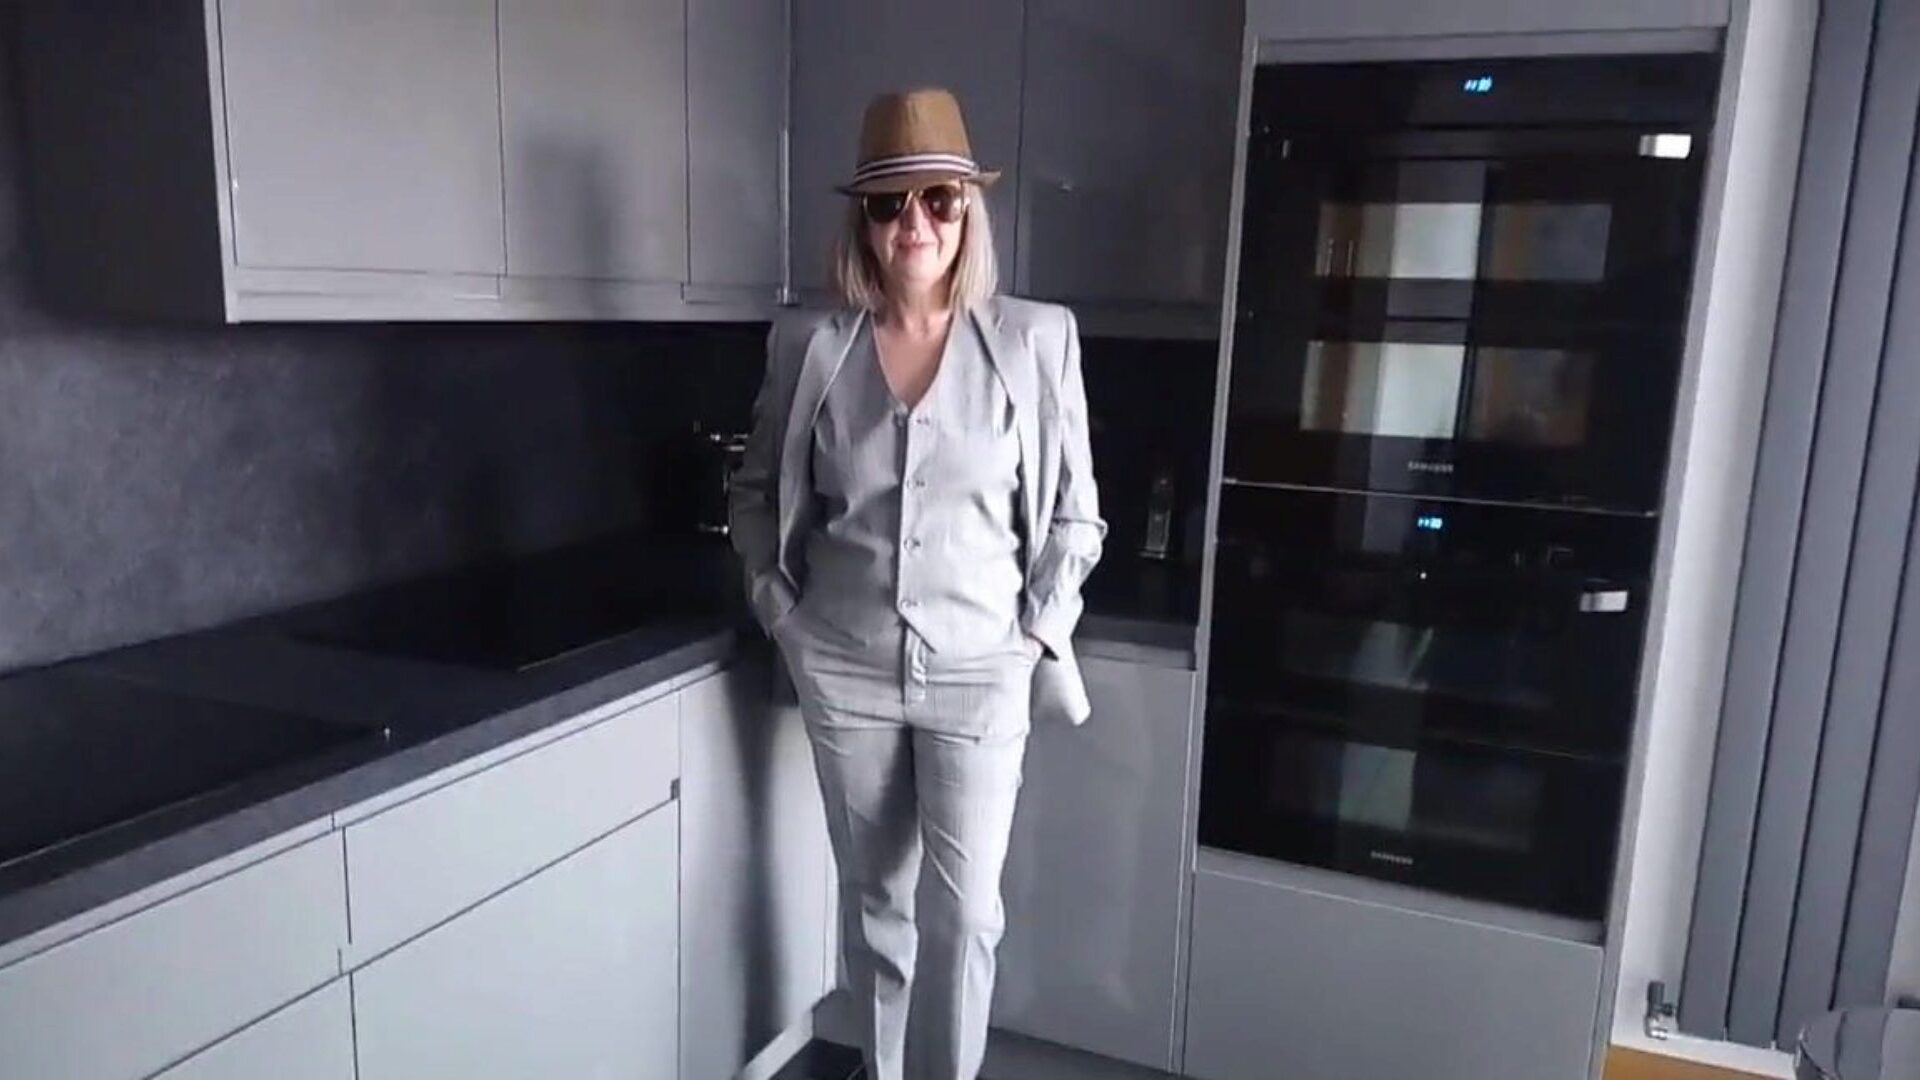 Debbie Suits the Kitchen, Free Wife Porn Video 74: xHamster Watch Debbie Suits the Kitchen movie on xHamster, the best HD romp tube site with tons of free British Wife & Mature porno vids